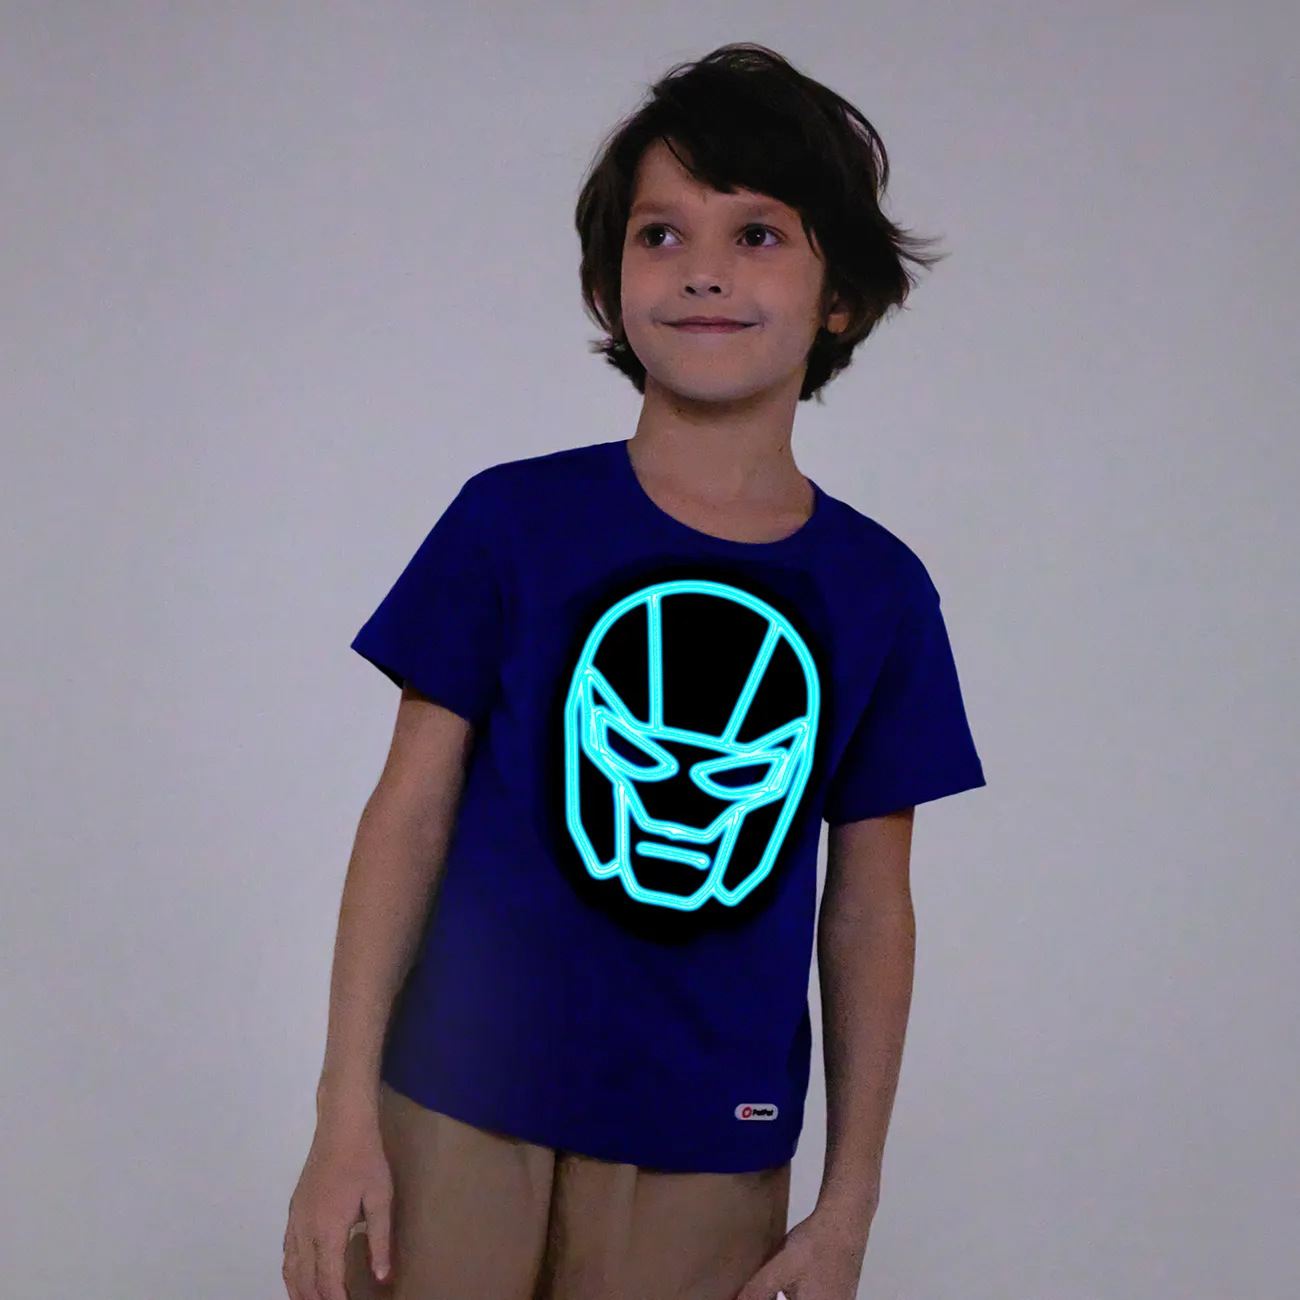 Go-Glow Illuminating T-shirt with Removable Light Up Mask Including Controller (Built-In Battery) Blue big image 1